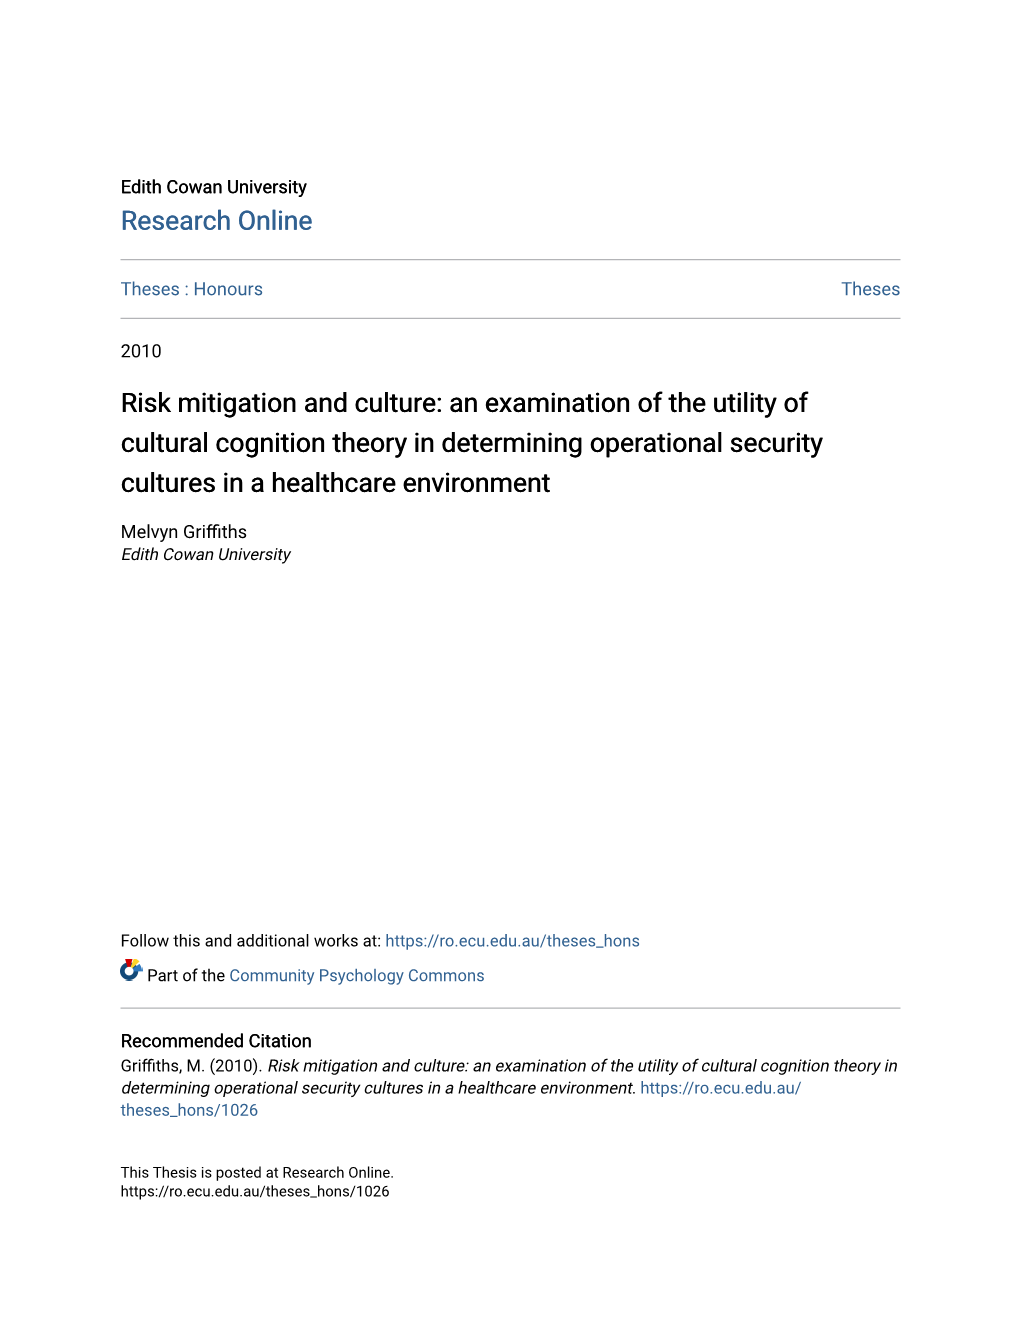 Risk Mitigation and Culture: an Examination of the Utility of Cultural Cognition Theory in Determining Operational Security Cultures in a Healthcare Environment